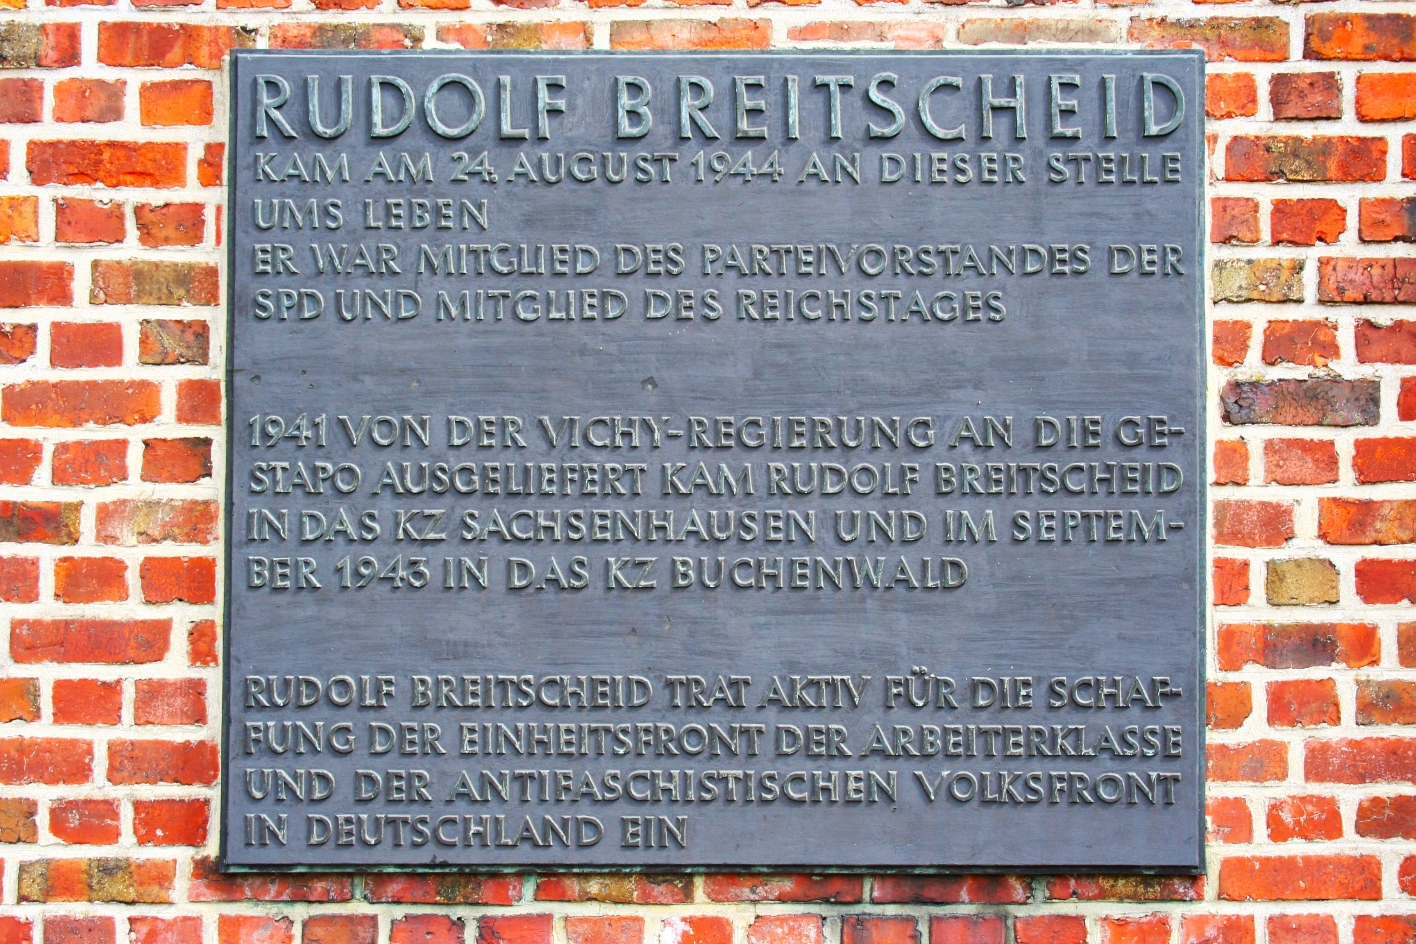 Memorial plaque for Rudolf Breitscheid on a brick wall. There it says: "Rudolf Breitscheid was killed at this spot on August 24, 1944. He was a member of the party executive of the SPD and a member of the Reichstag. Extradited to the Gestapo by the Vichy government in 1941, Rudolf Breitscheid was sent to Sachenhausen concentration camp and in September 1943 to Buchenwald concentration camp. Rudolf Breitscheid advocated the creation of the united front of the working class and the anti-fascist popular front in Germany.